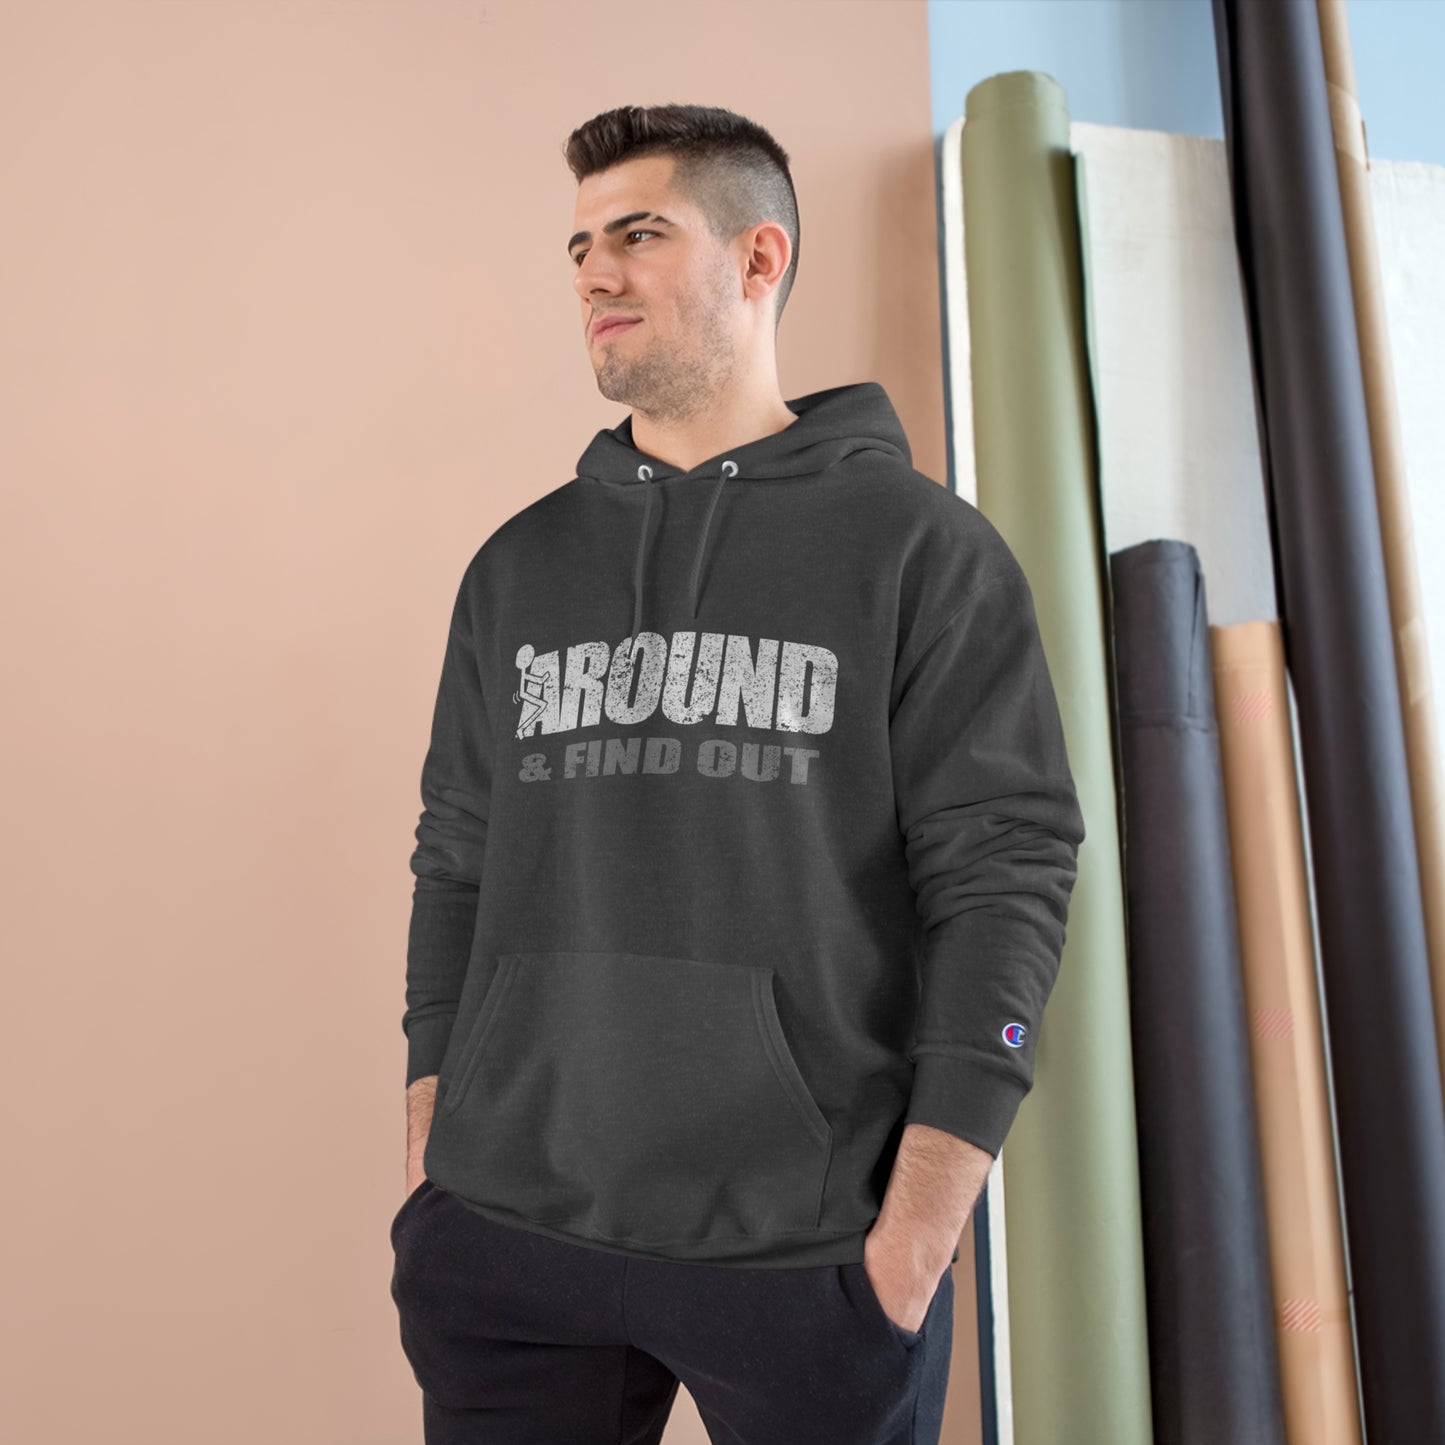 F#*k around and find out Champion Hoodie - Charcoal Heather / S - Charcoal Heather / M - Charcoal Heather / L - Charcoal Heather / XL - Charcoal Heather / 2XL